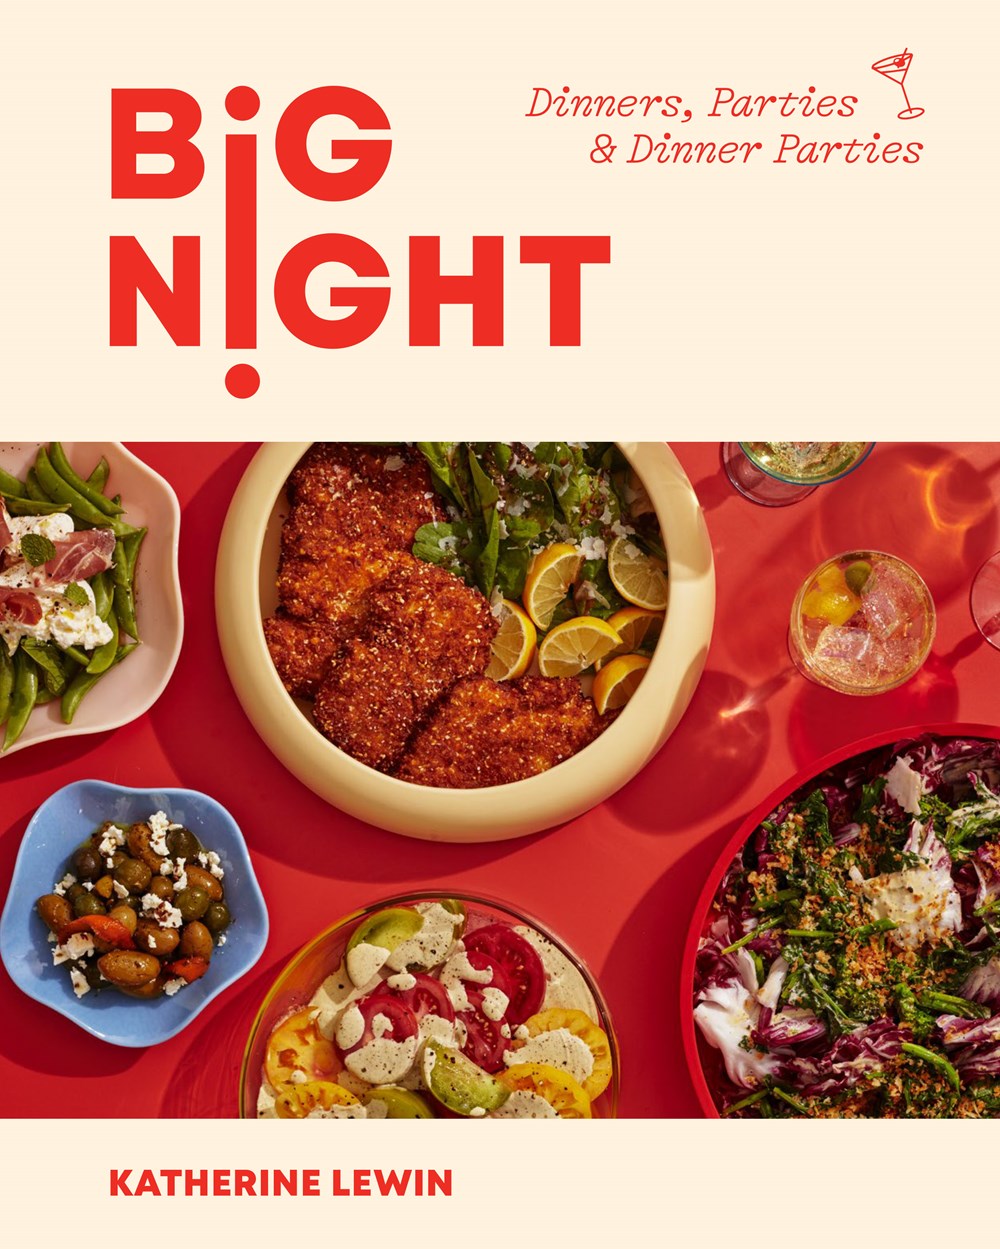 Big Night: Dinners, Parties, and Dinner Parties by Katherine Lewin (6/4/24)